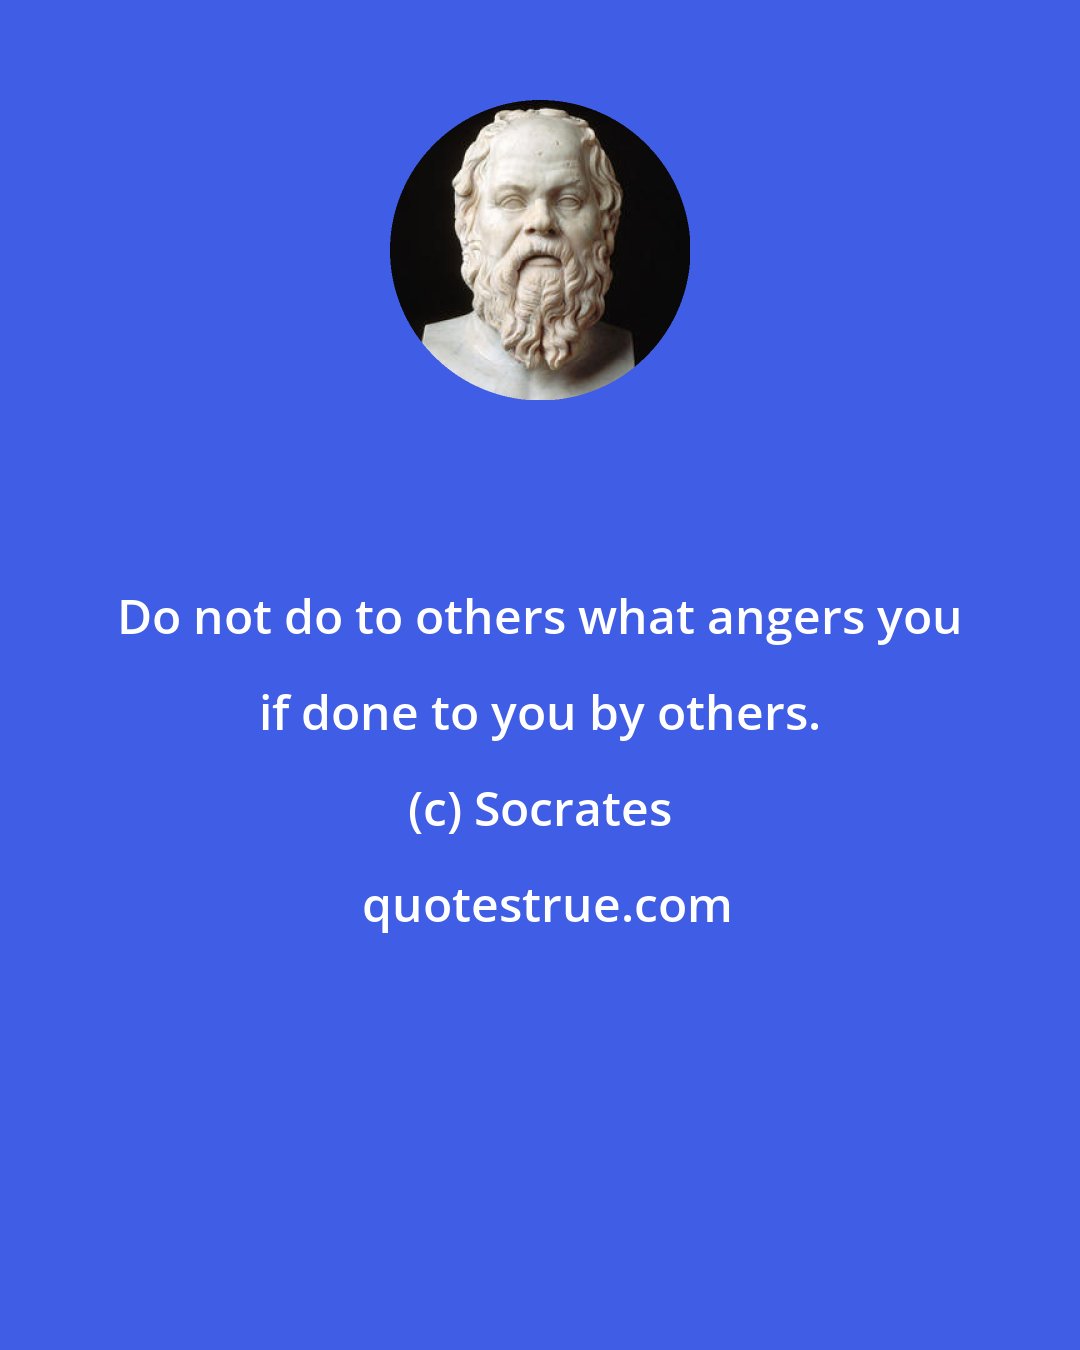 Socrates: Do not do to others what angers you if done to you by others.